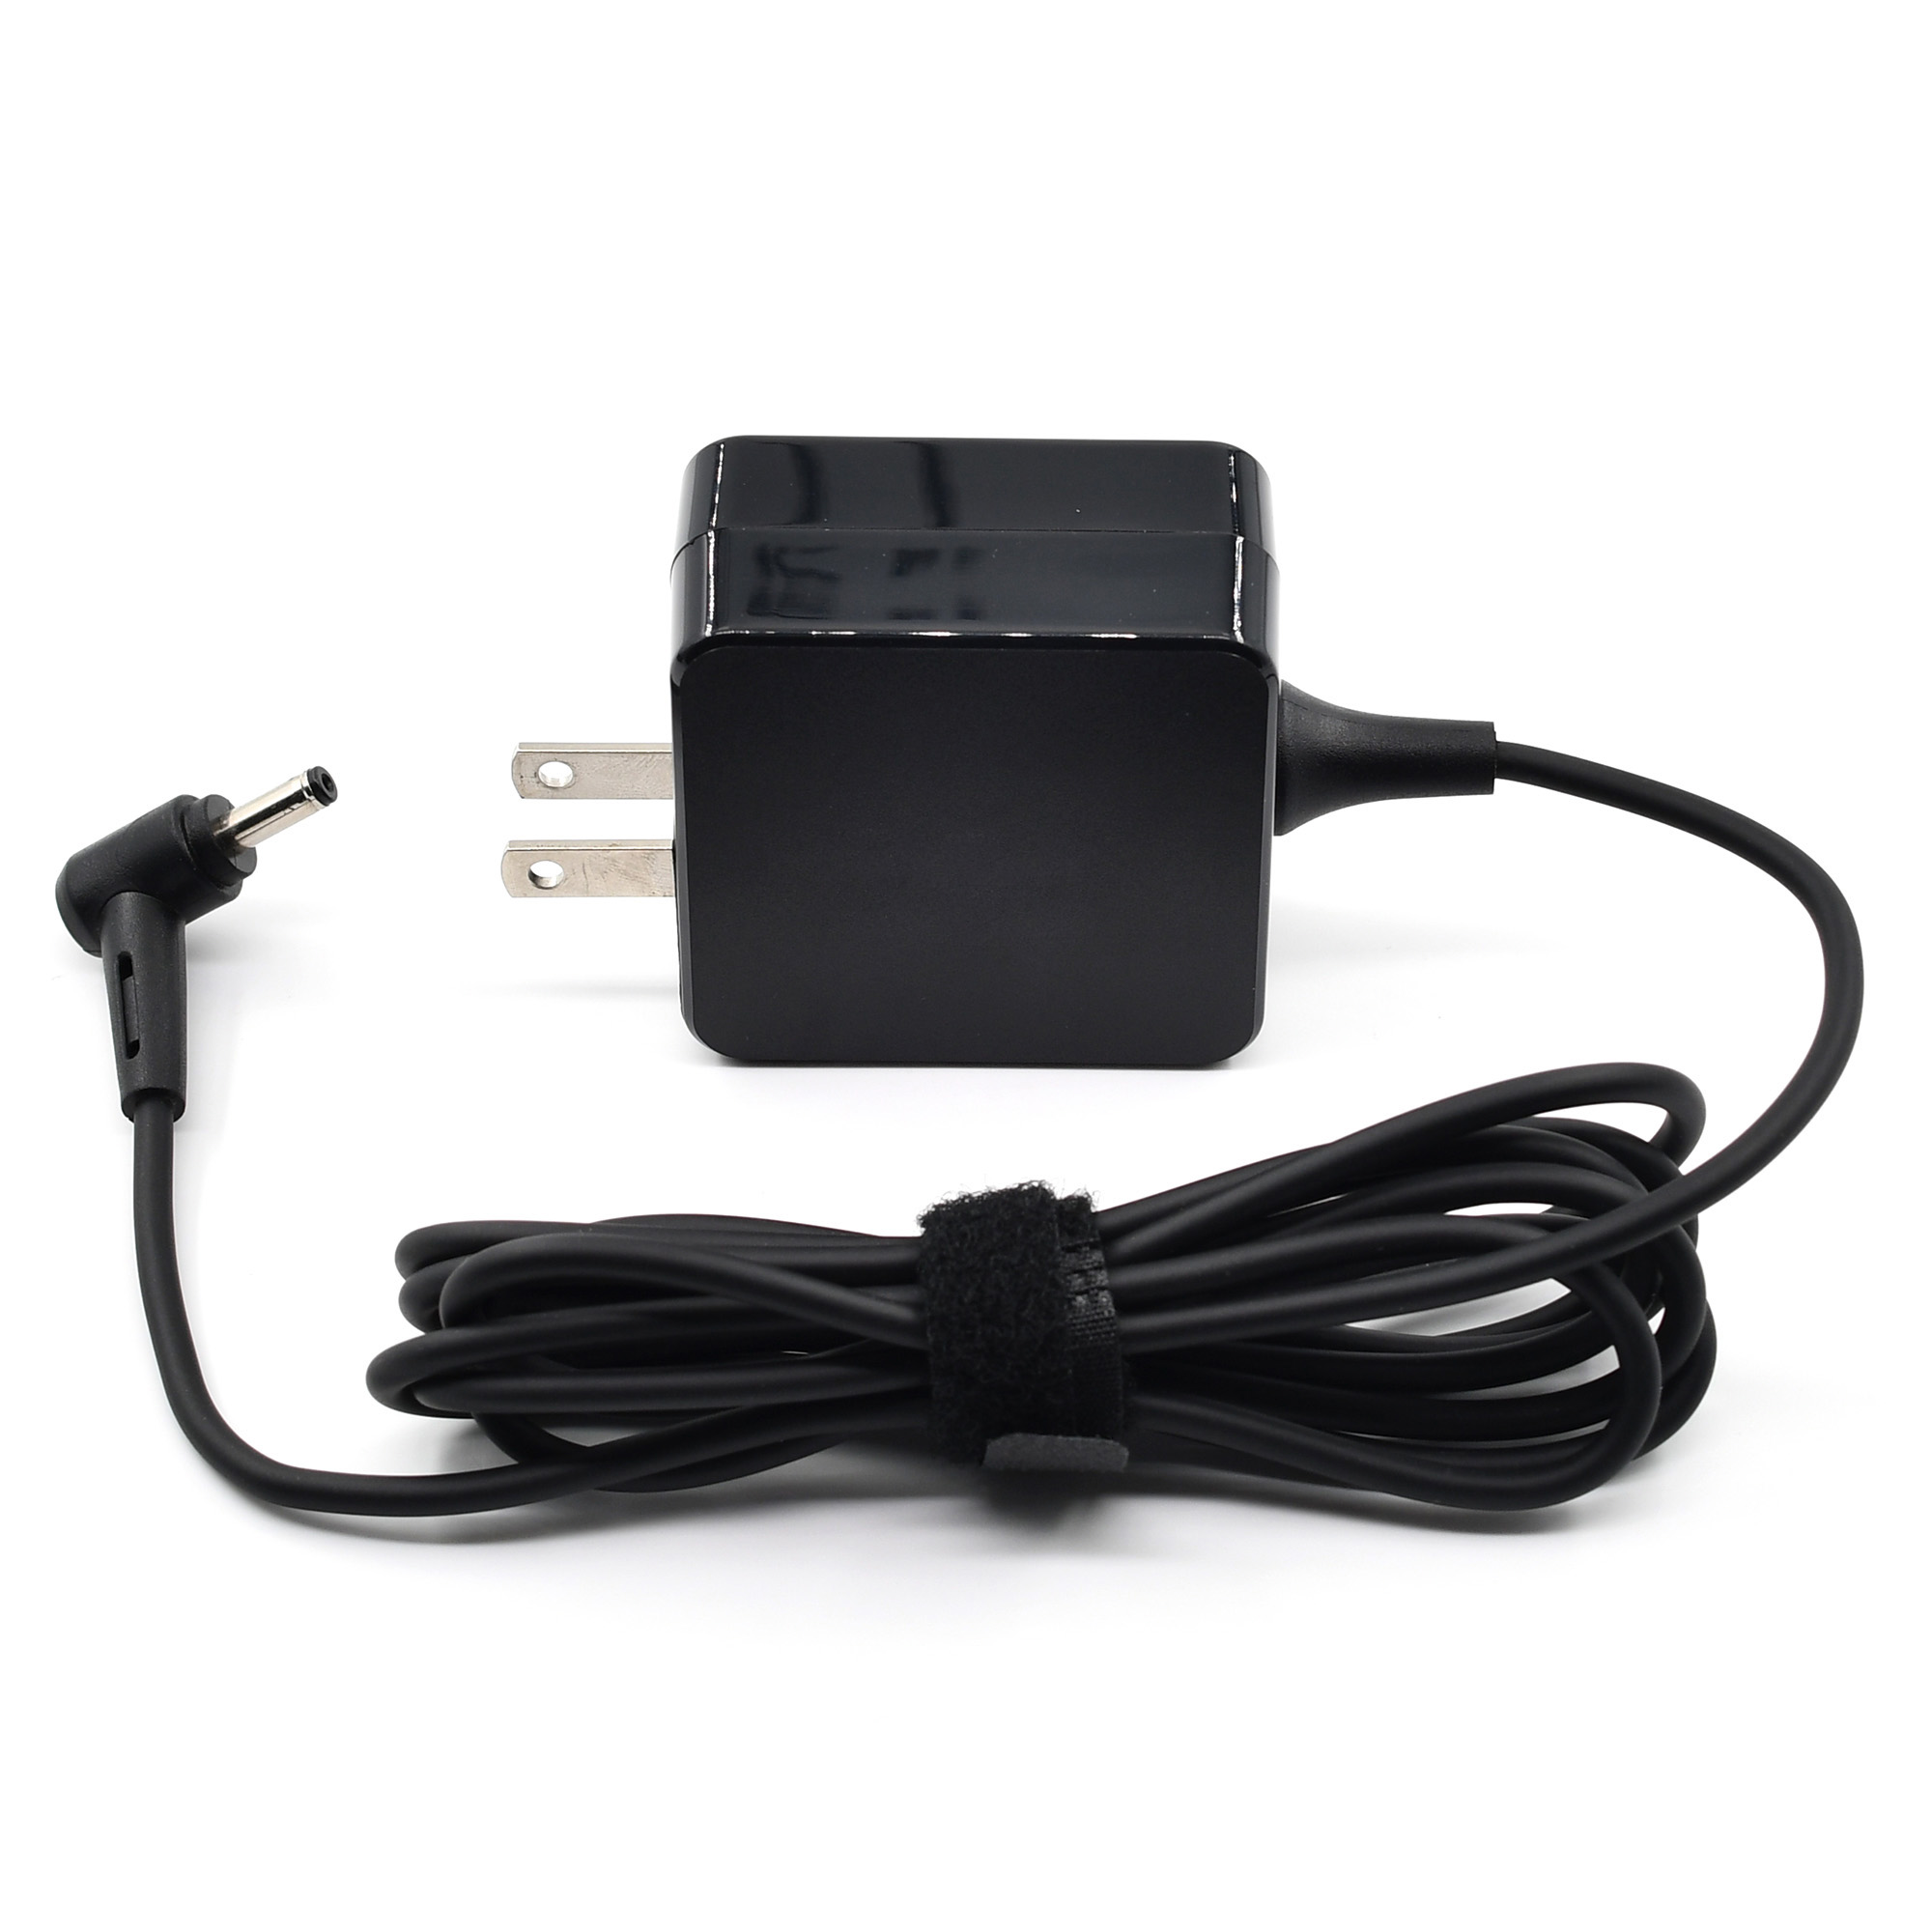 33W Laptop Charger EXA1206CH EXA1206UH PA-1330-39 Power Supply for Asus VivoBook Q200 Q200E S200 S200E - image 3 of 6